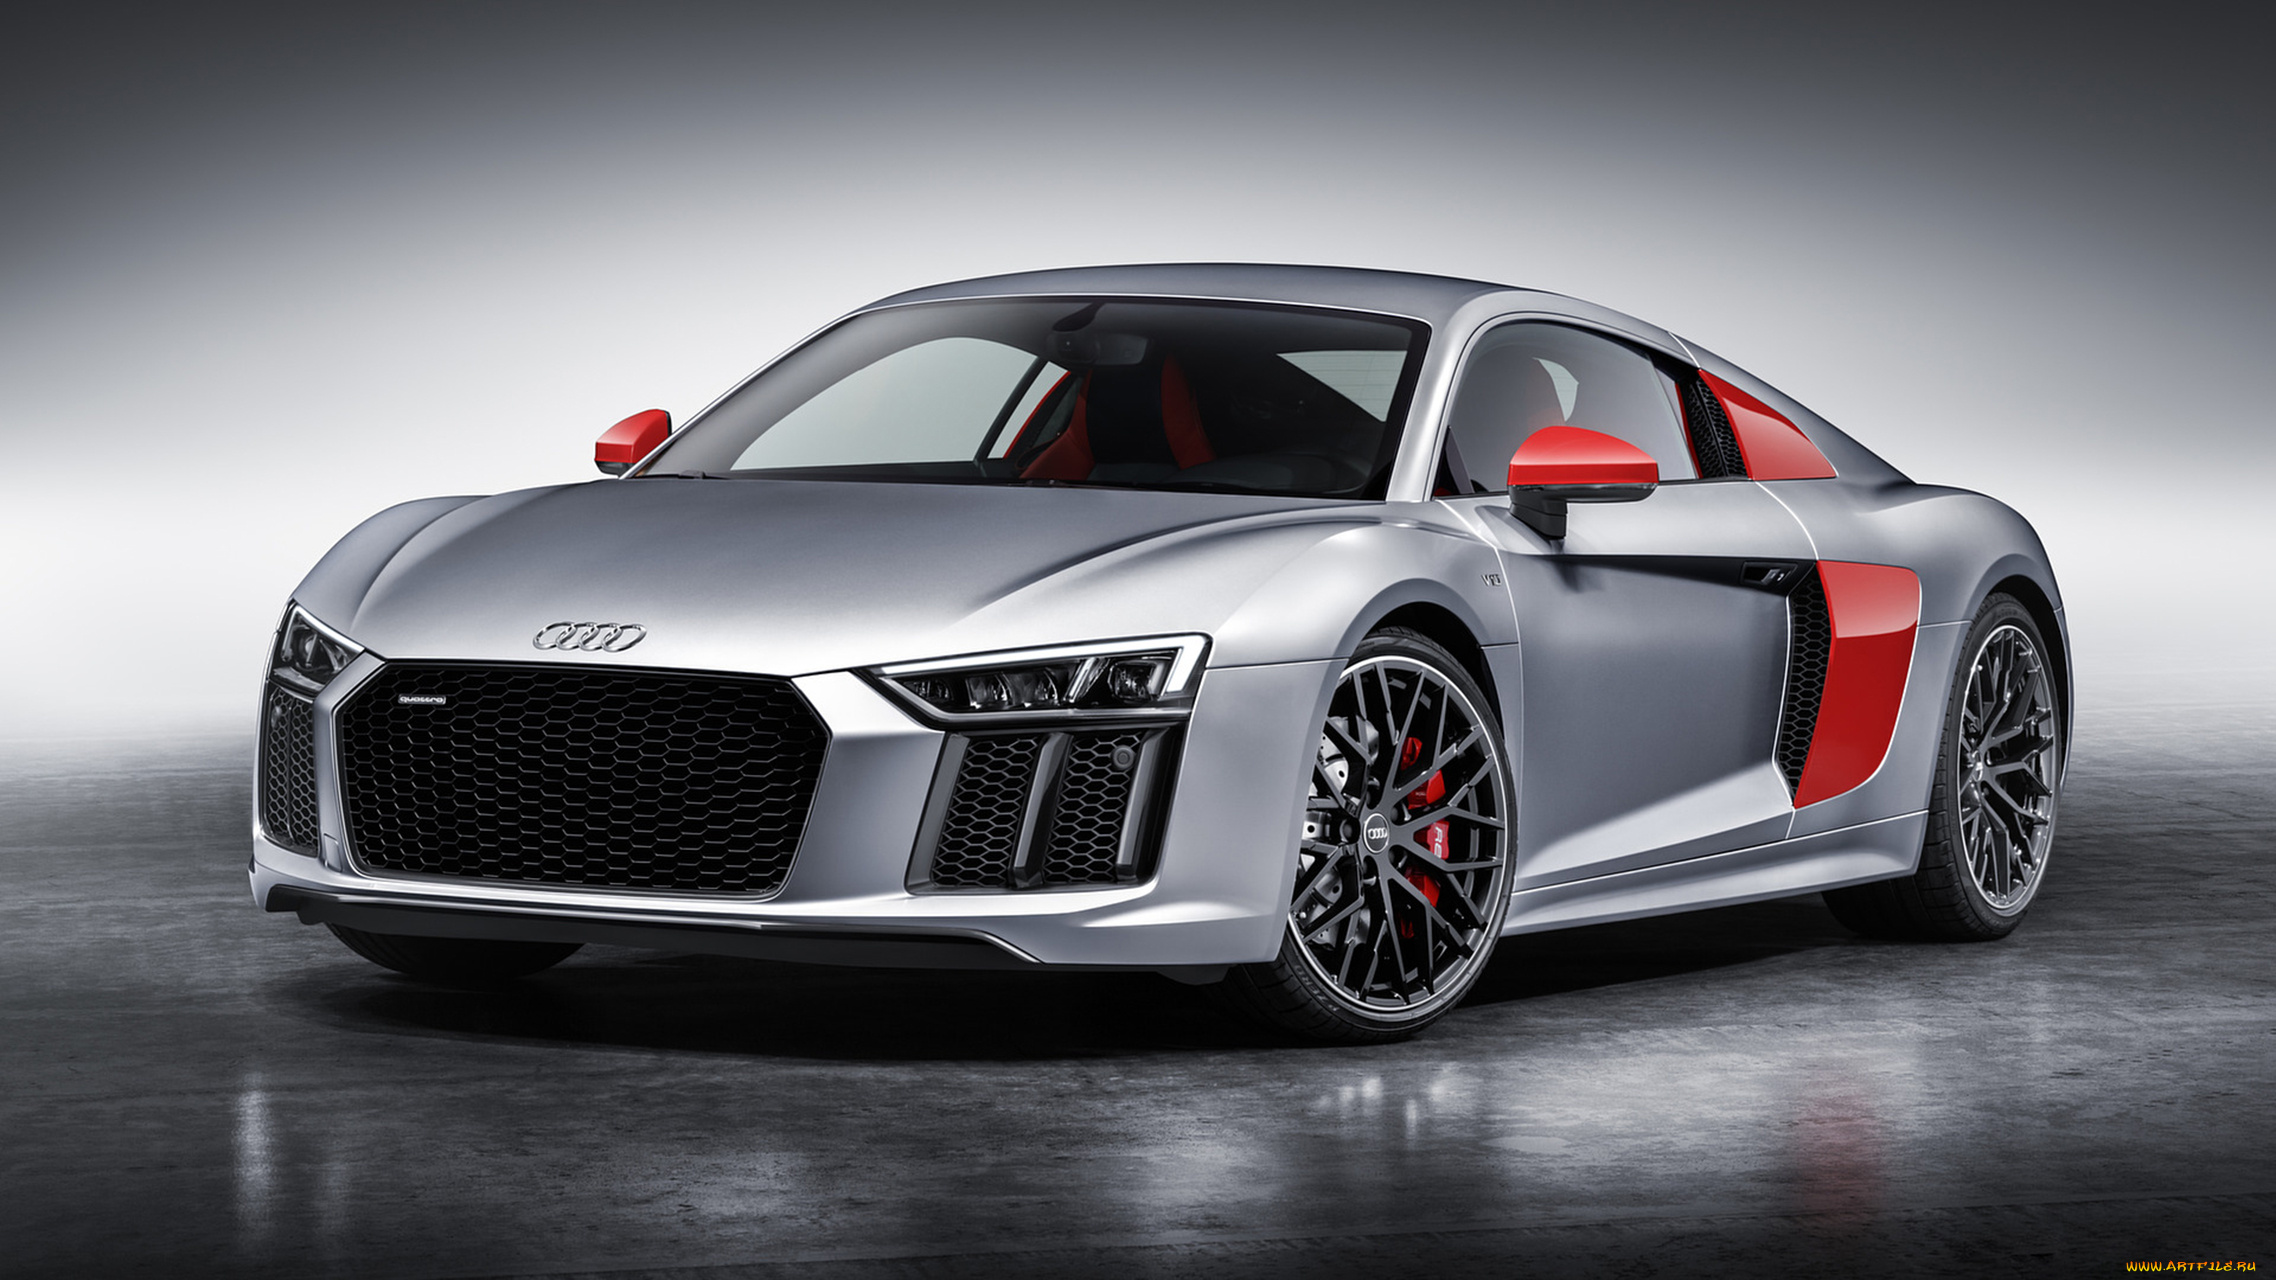 audi, r8-v10, coupe, edition, sport, 2018, автомобили, audi, sport, edition, coupe, r8-v10, 2018